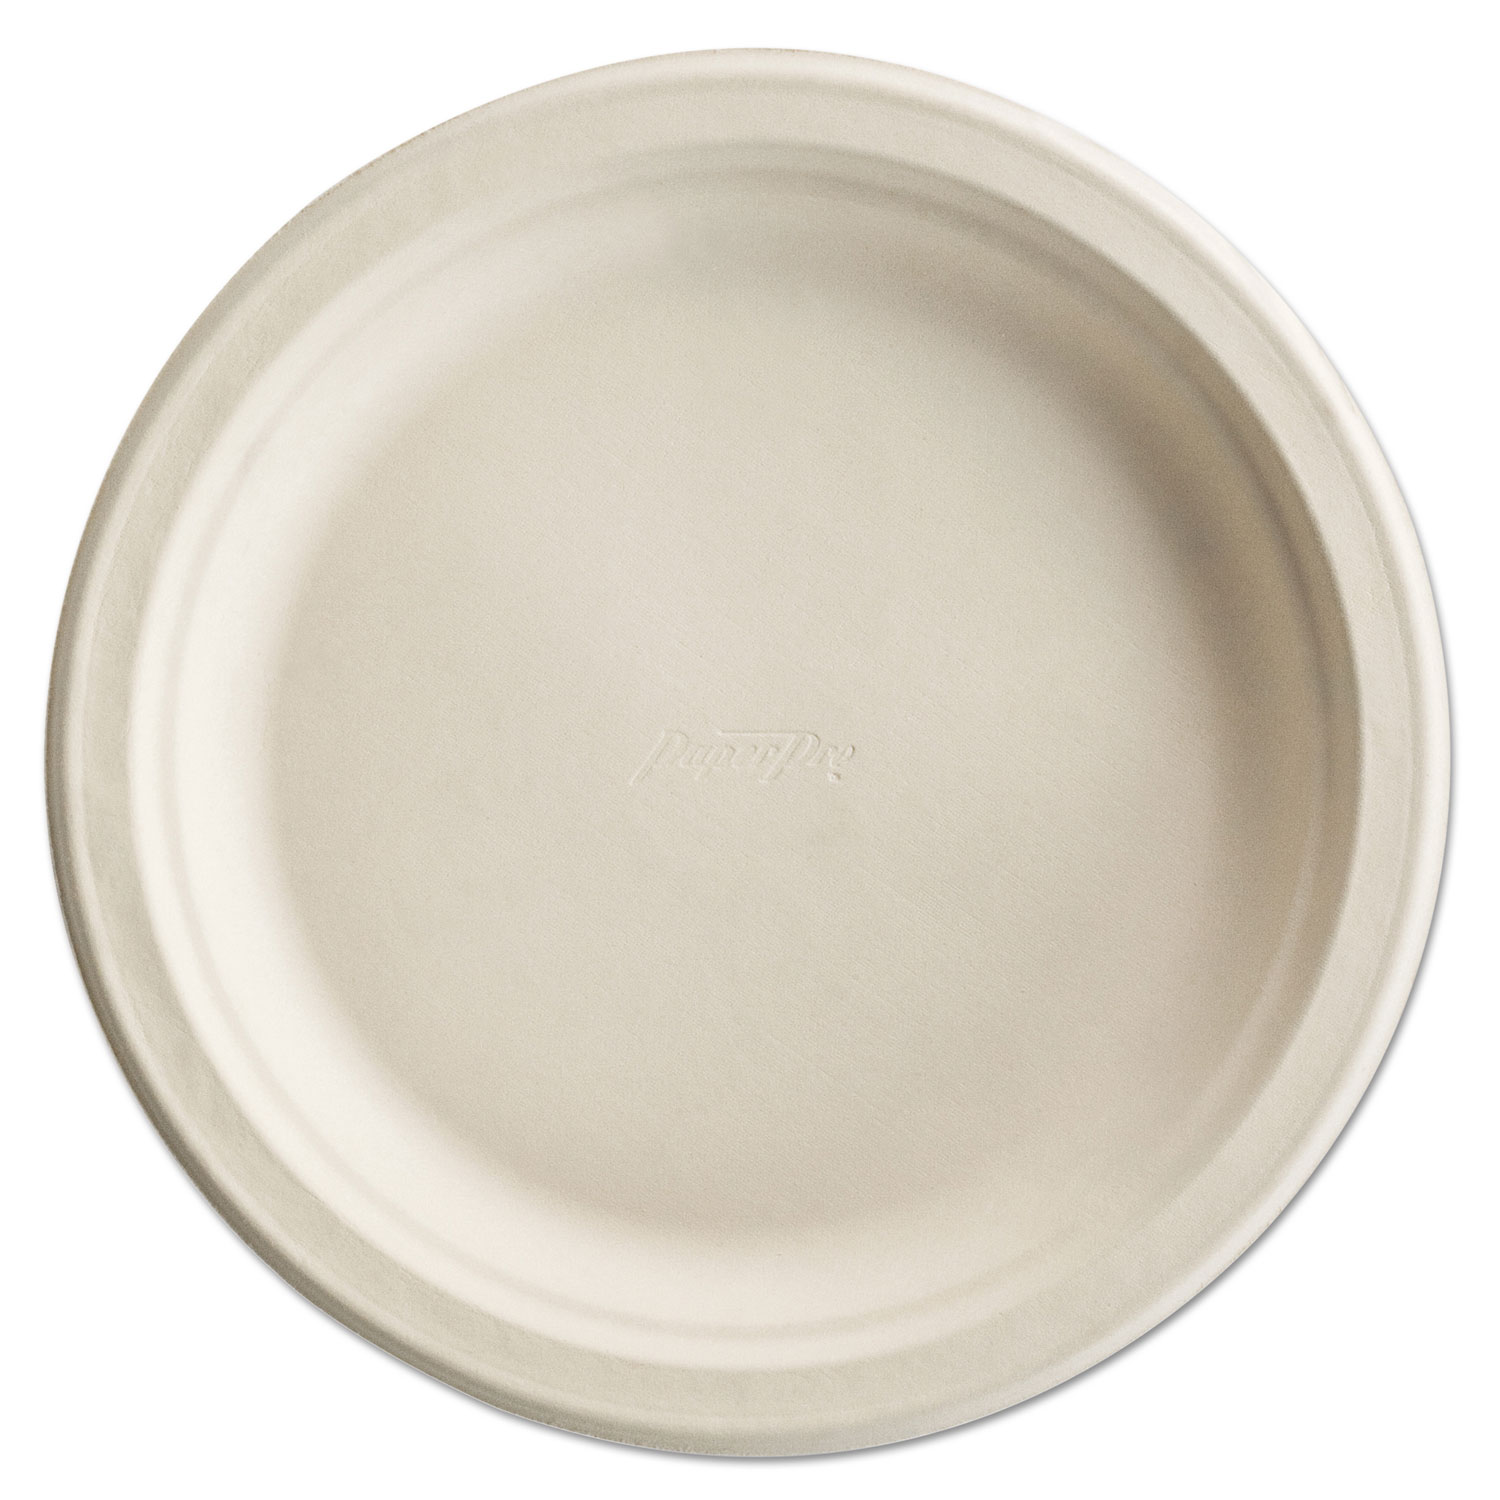  Chinet 25774 Paper Pro Round Plates, 6 Inches, White, 125/Pack (HUH25774) 